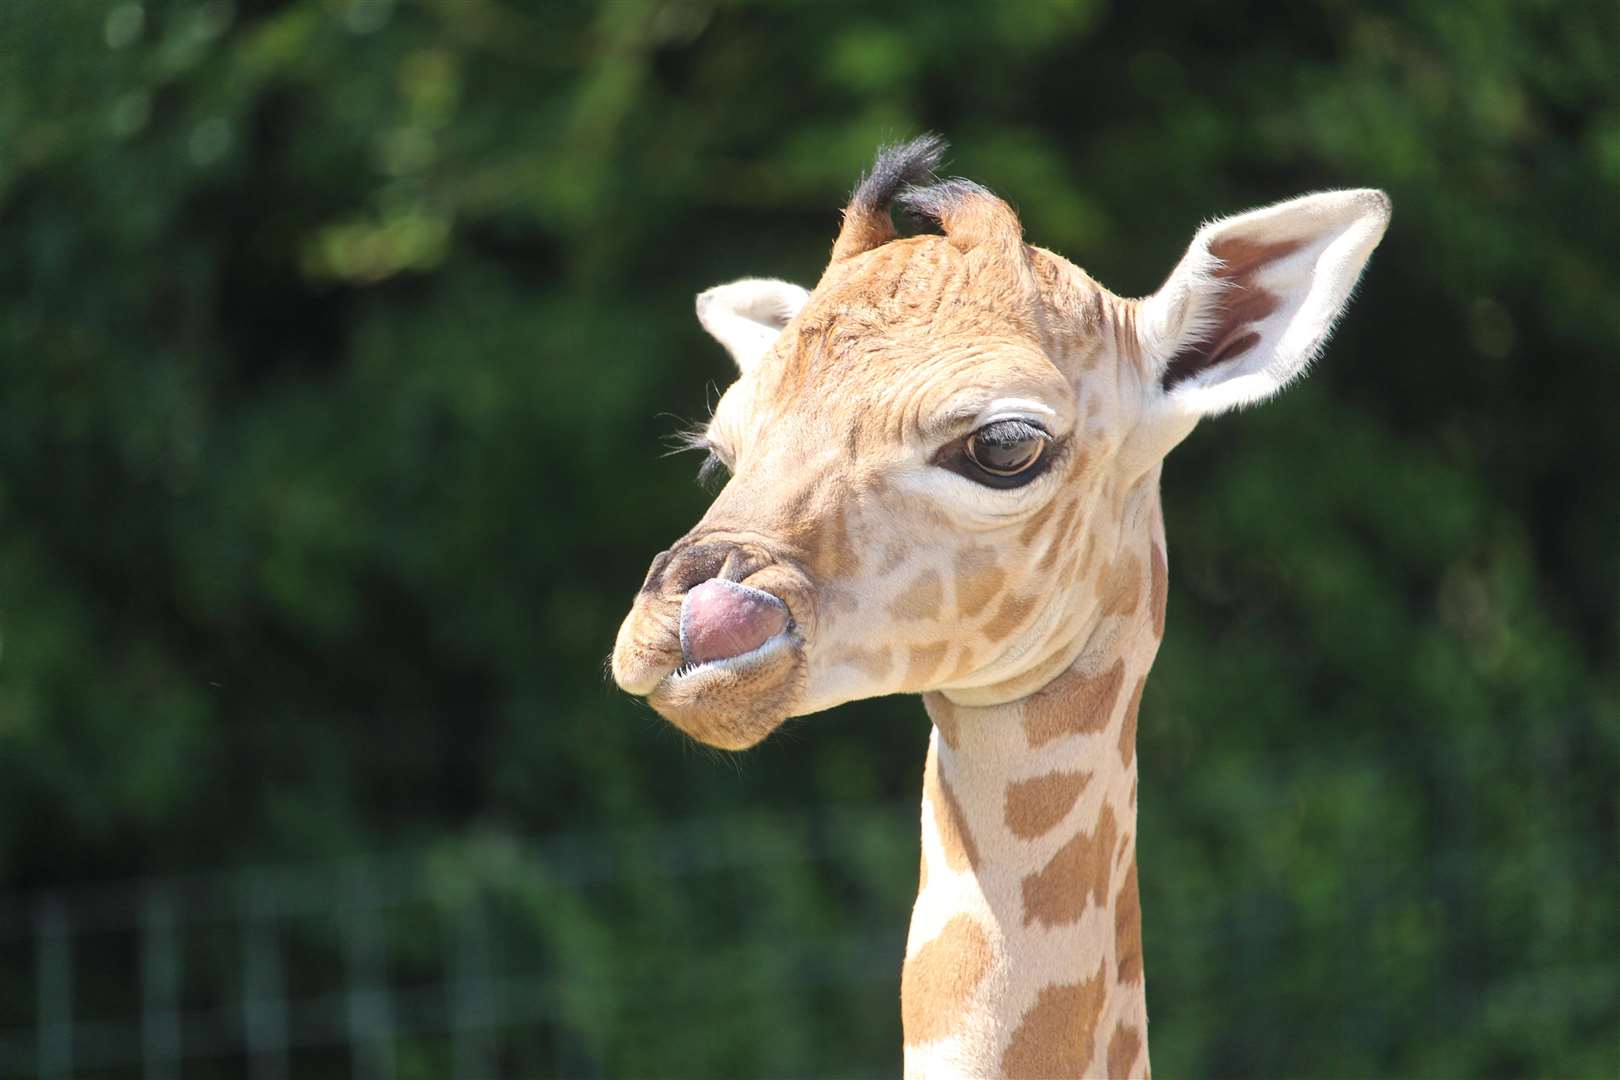 The male giraffe calf at Port Lympne that has passed away